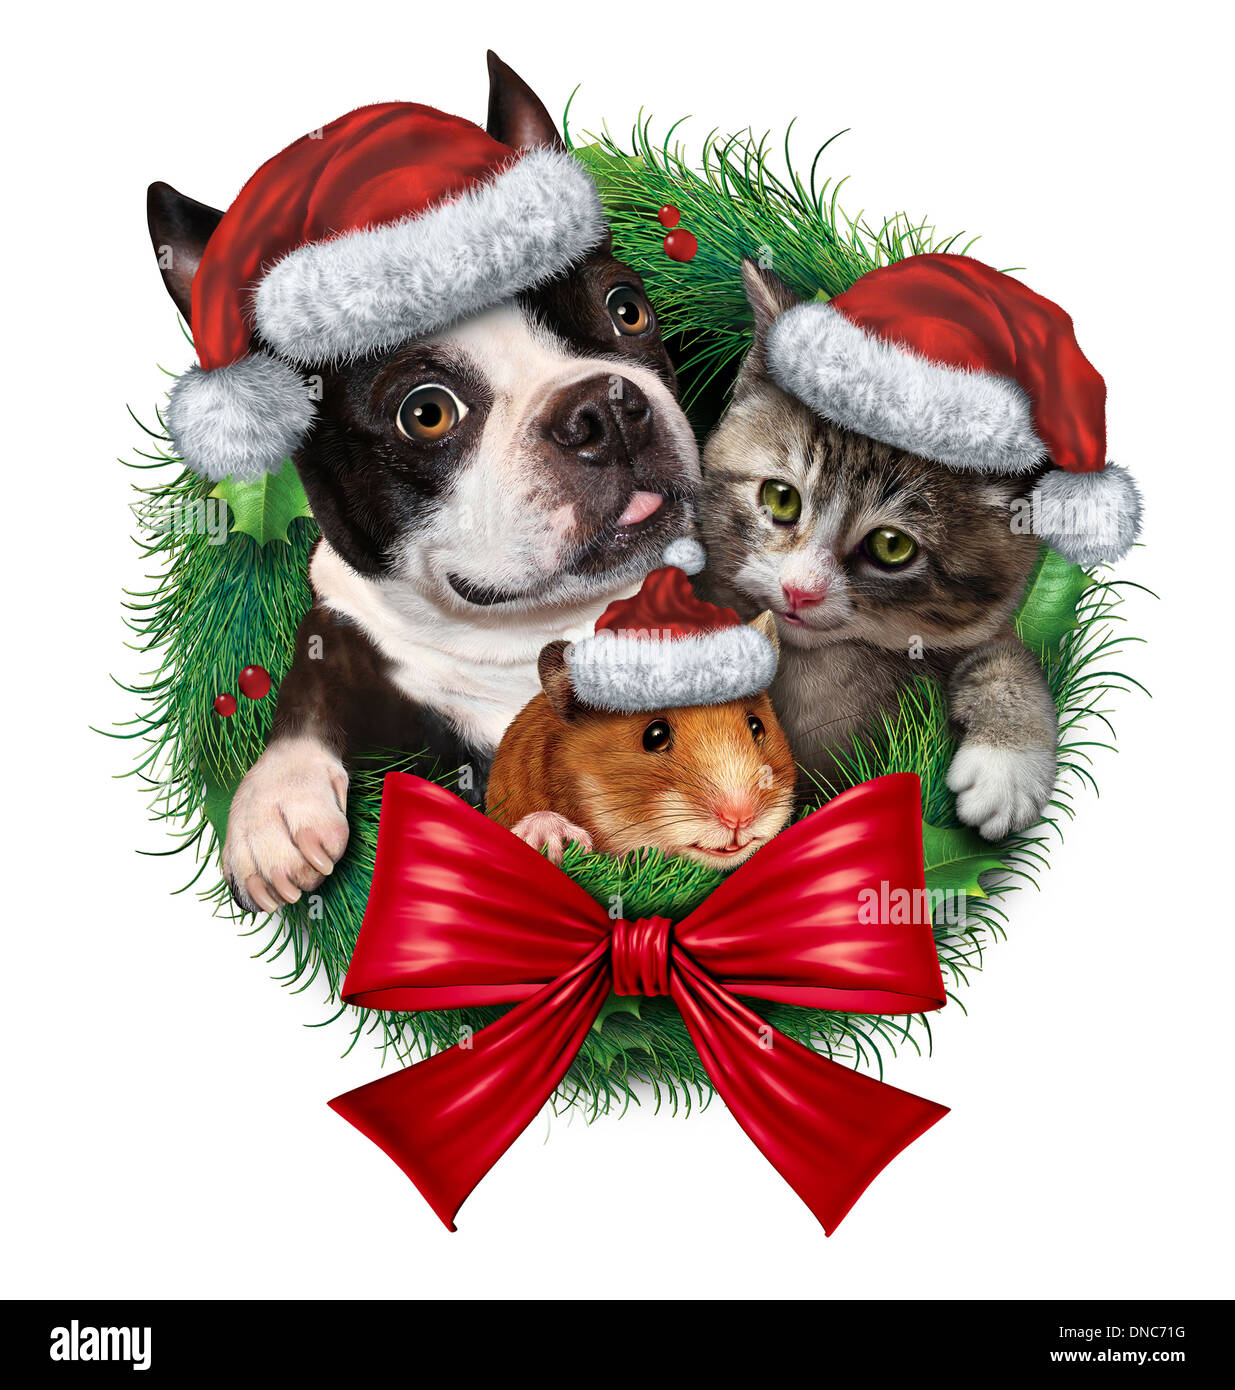 Pets holiday wreath with a dog cat and hamster wearing Christmas hats as a symbol of veterinary medicine and pet store or animal adoption issues during the winter season celebration on a white background. Stock Photo